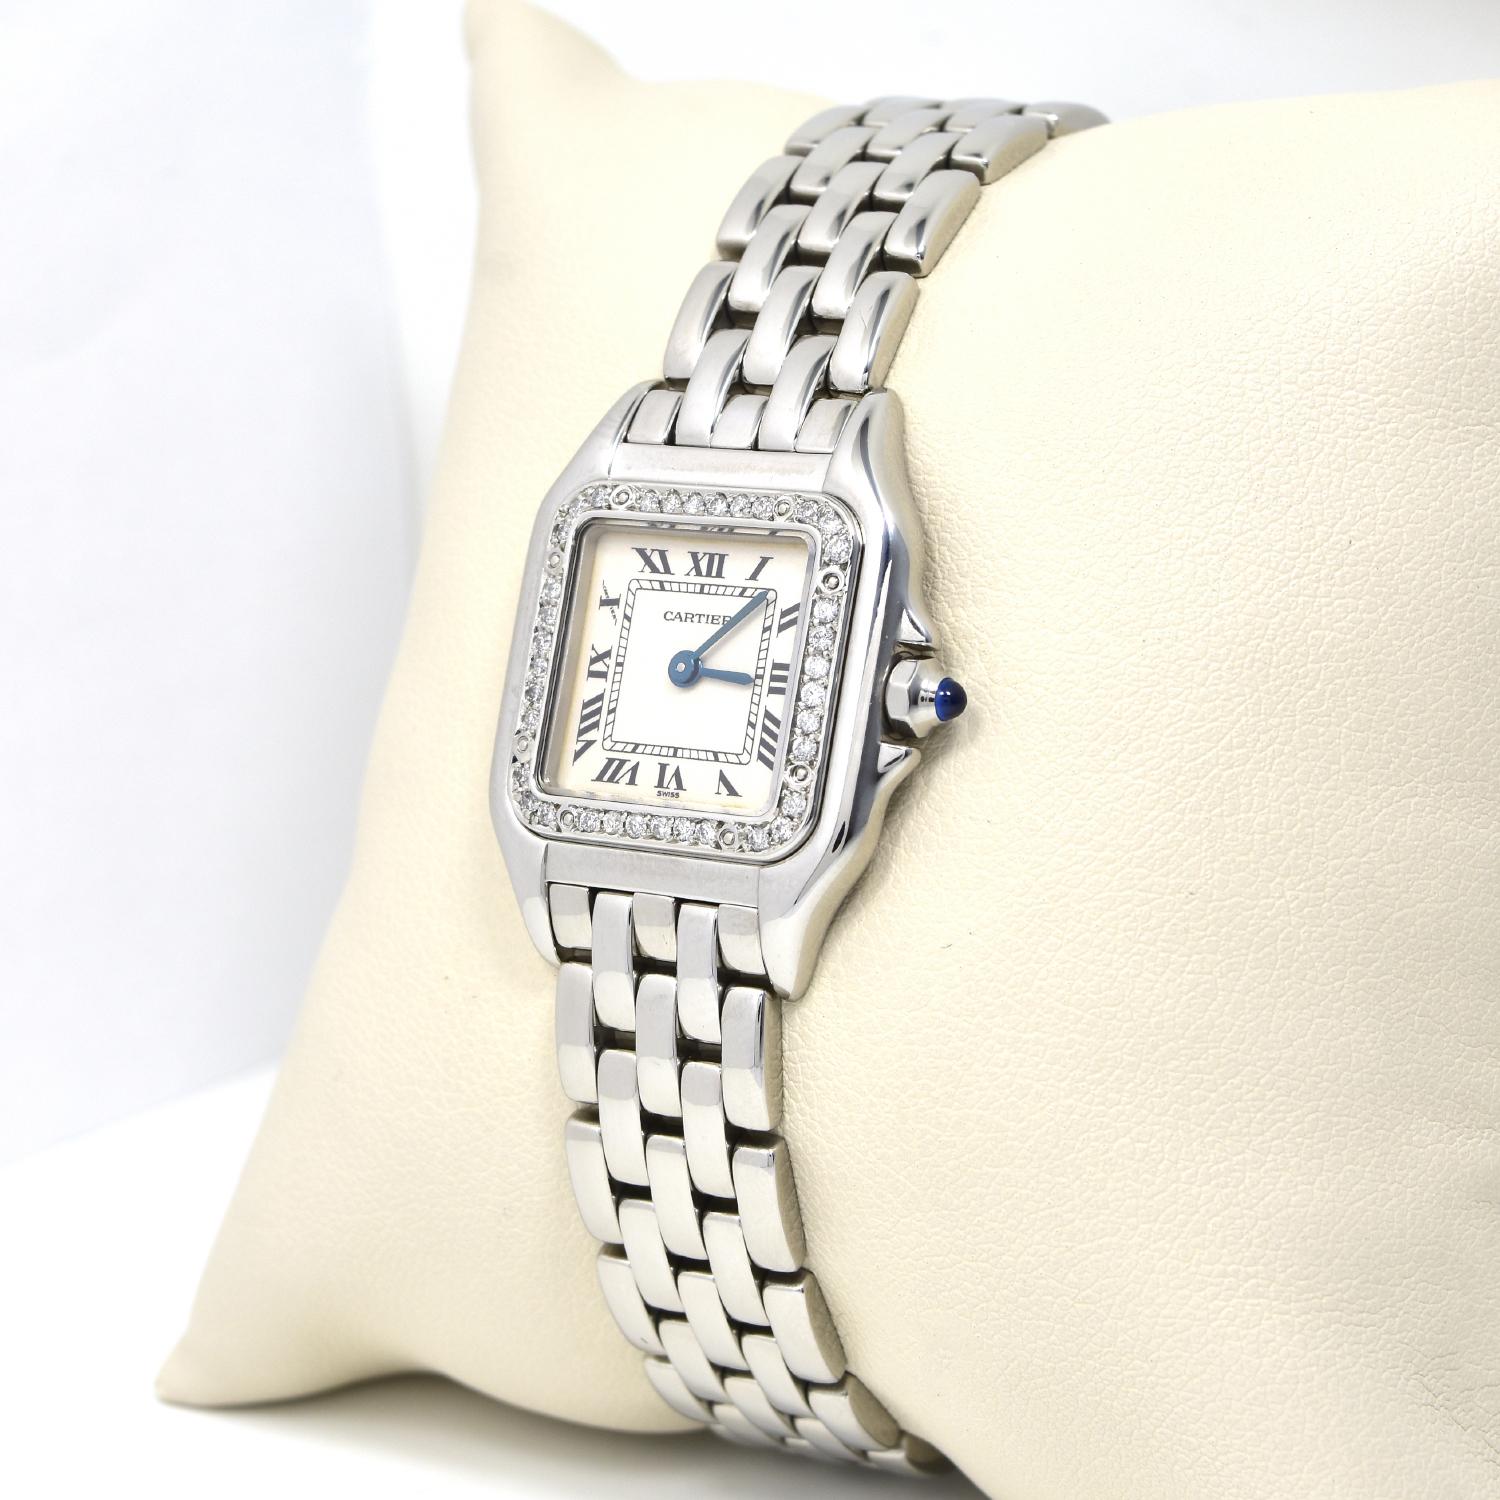 Case: 22mm Stainless steel case with custom diamonds set bezel

Dial: Gorgeous white dial with Roman numeral indexes

Bracelet: Fitted on a Stainless Steel Cartier bracelet

Accessories: Papers,

Brilliance Jewels

Notes: Elegant Cartier Panthere